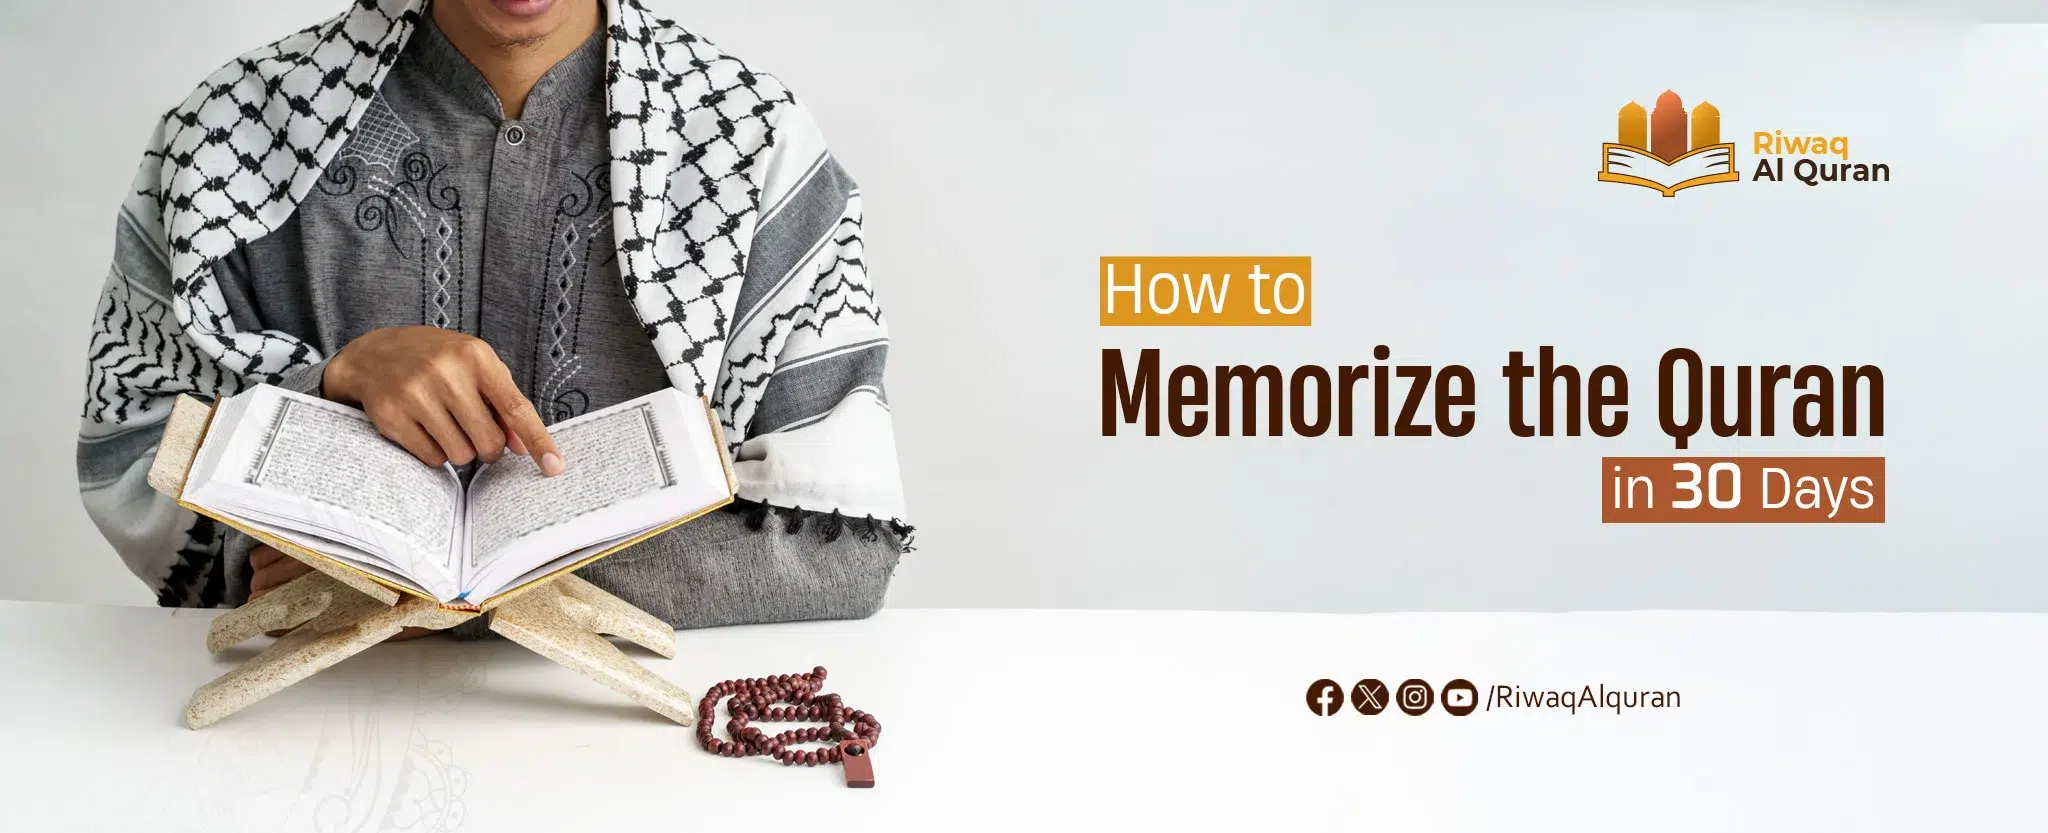 How to Memorize the Quran in 30 Days?